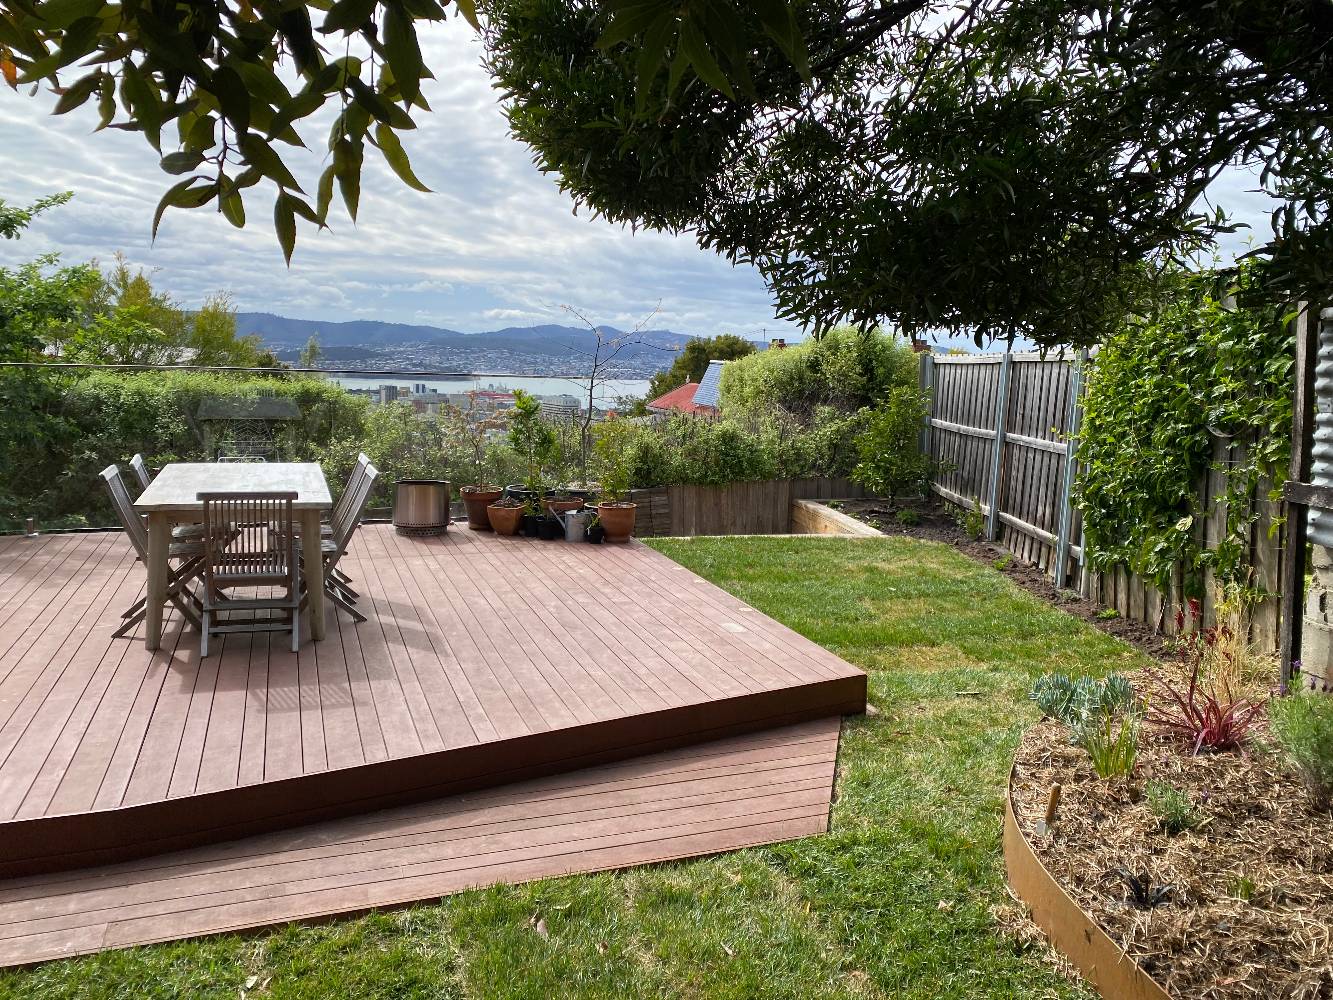 Private, sunny back yard with view of Derwent River